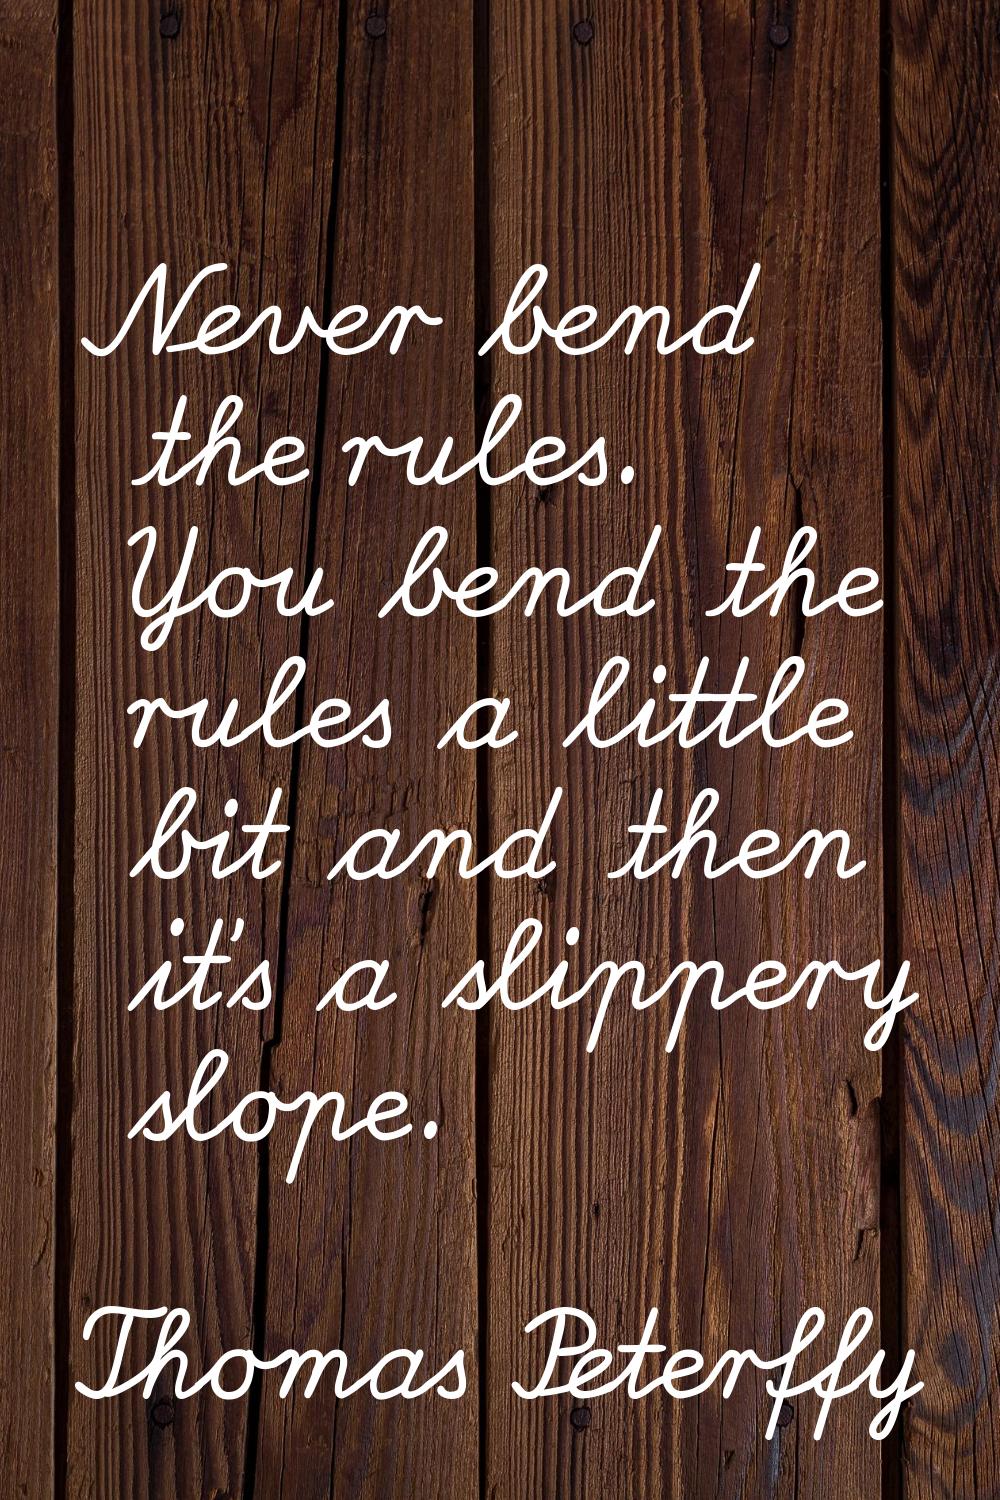 Never bend the rules. You bend the rules a little bit and then it's a slippery slope.